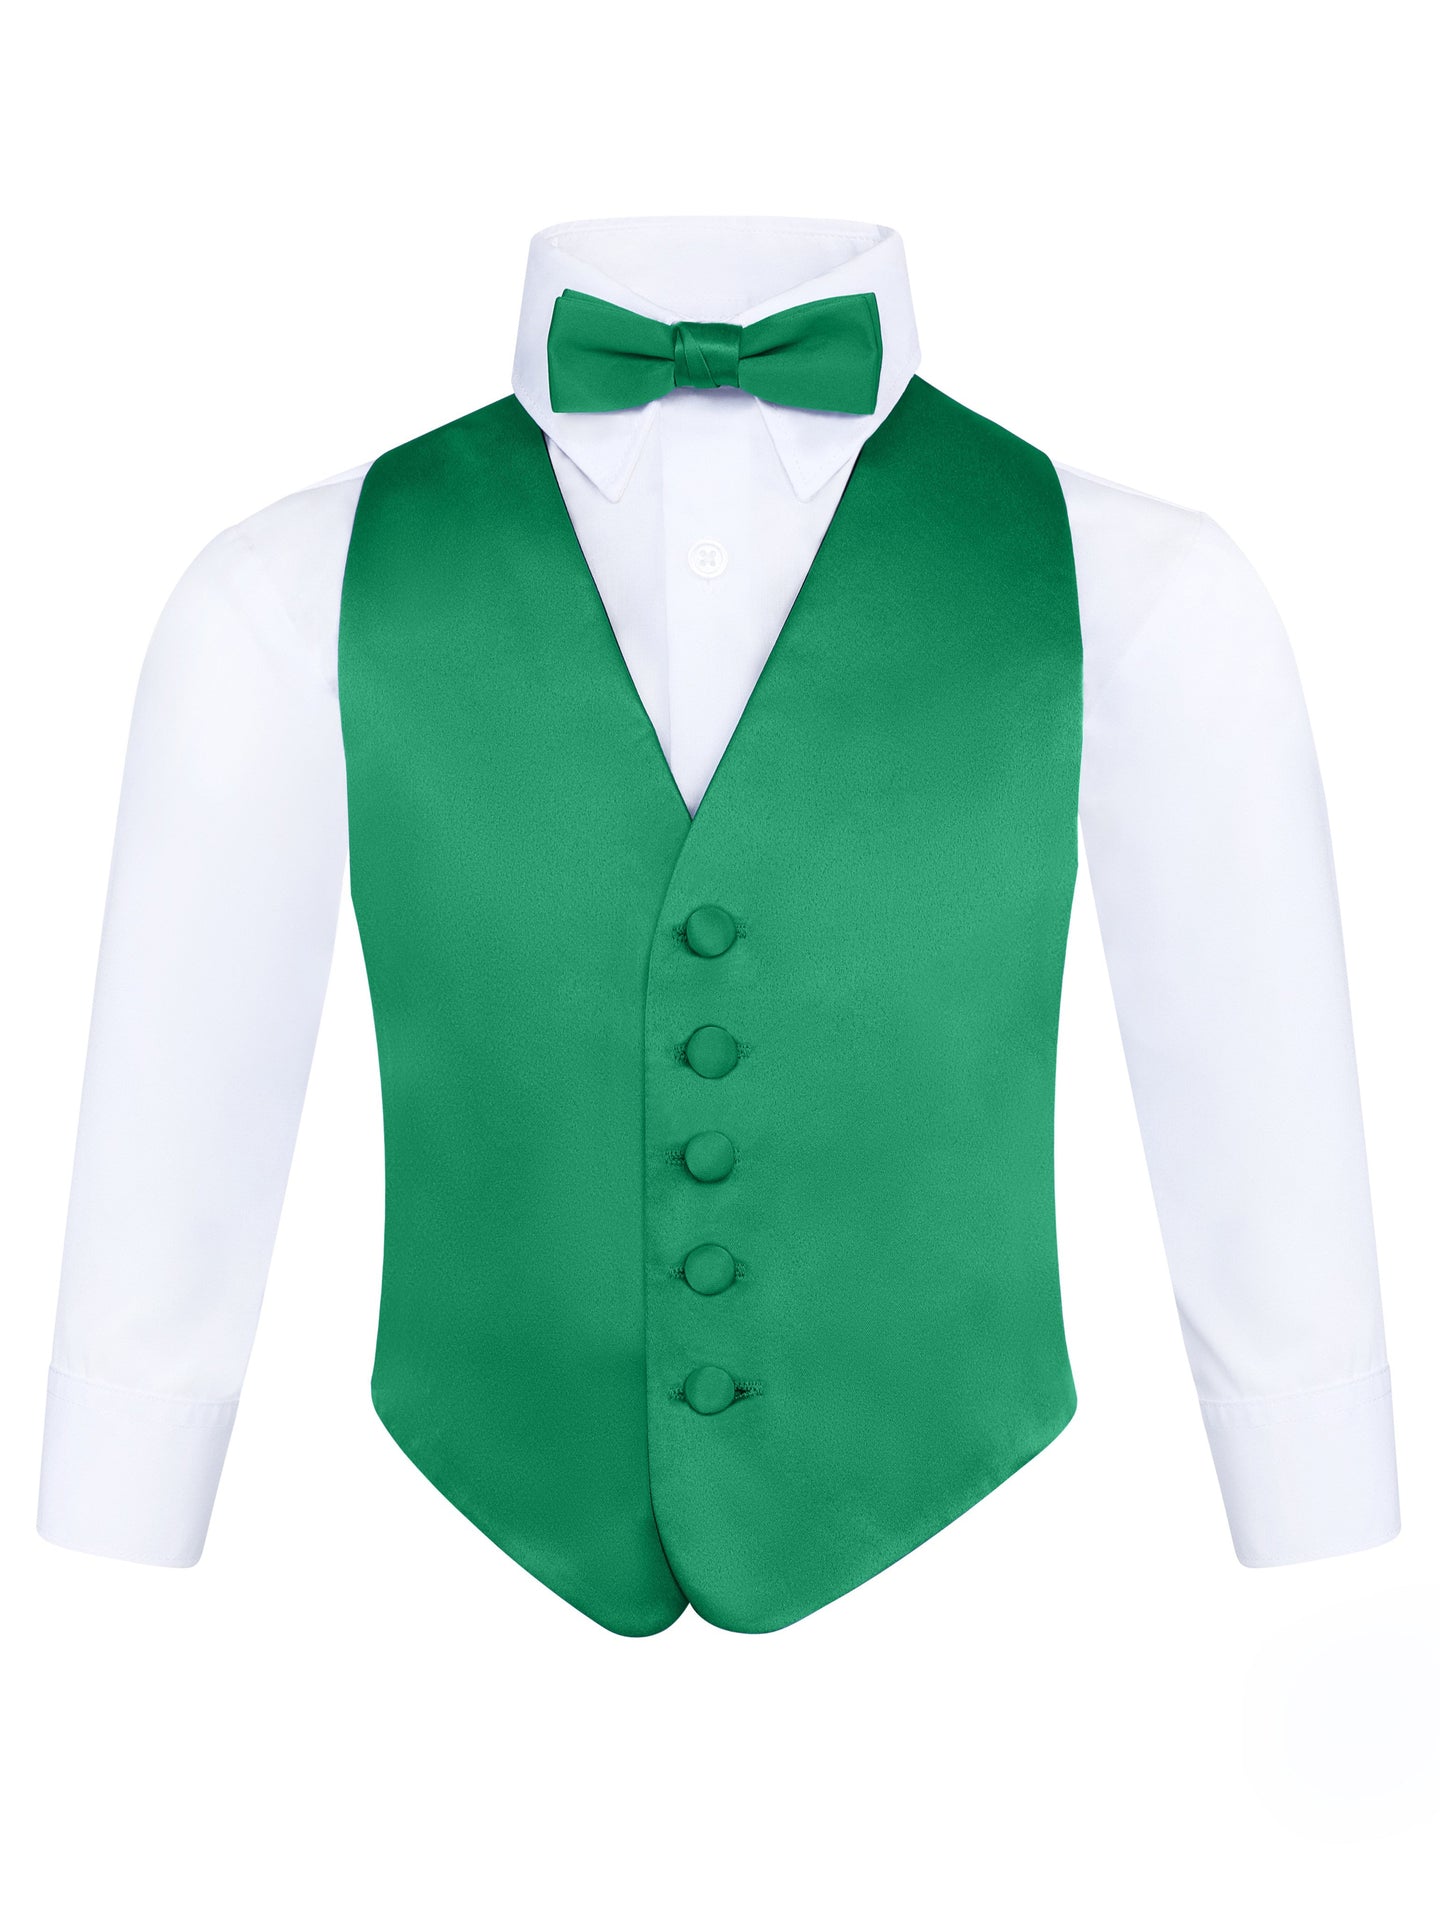 S.H. Churchill & Co. Boy's 3 Piece Kelly Green Backless Formal Vest Set - Includes Vest, Bow Tie, Pocket Square for Tuxedo or Suit